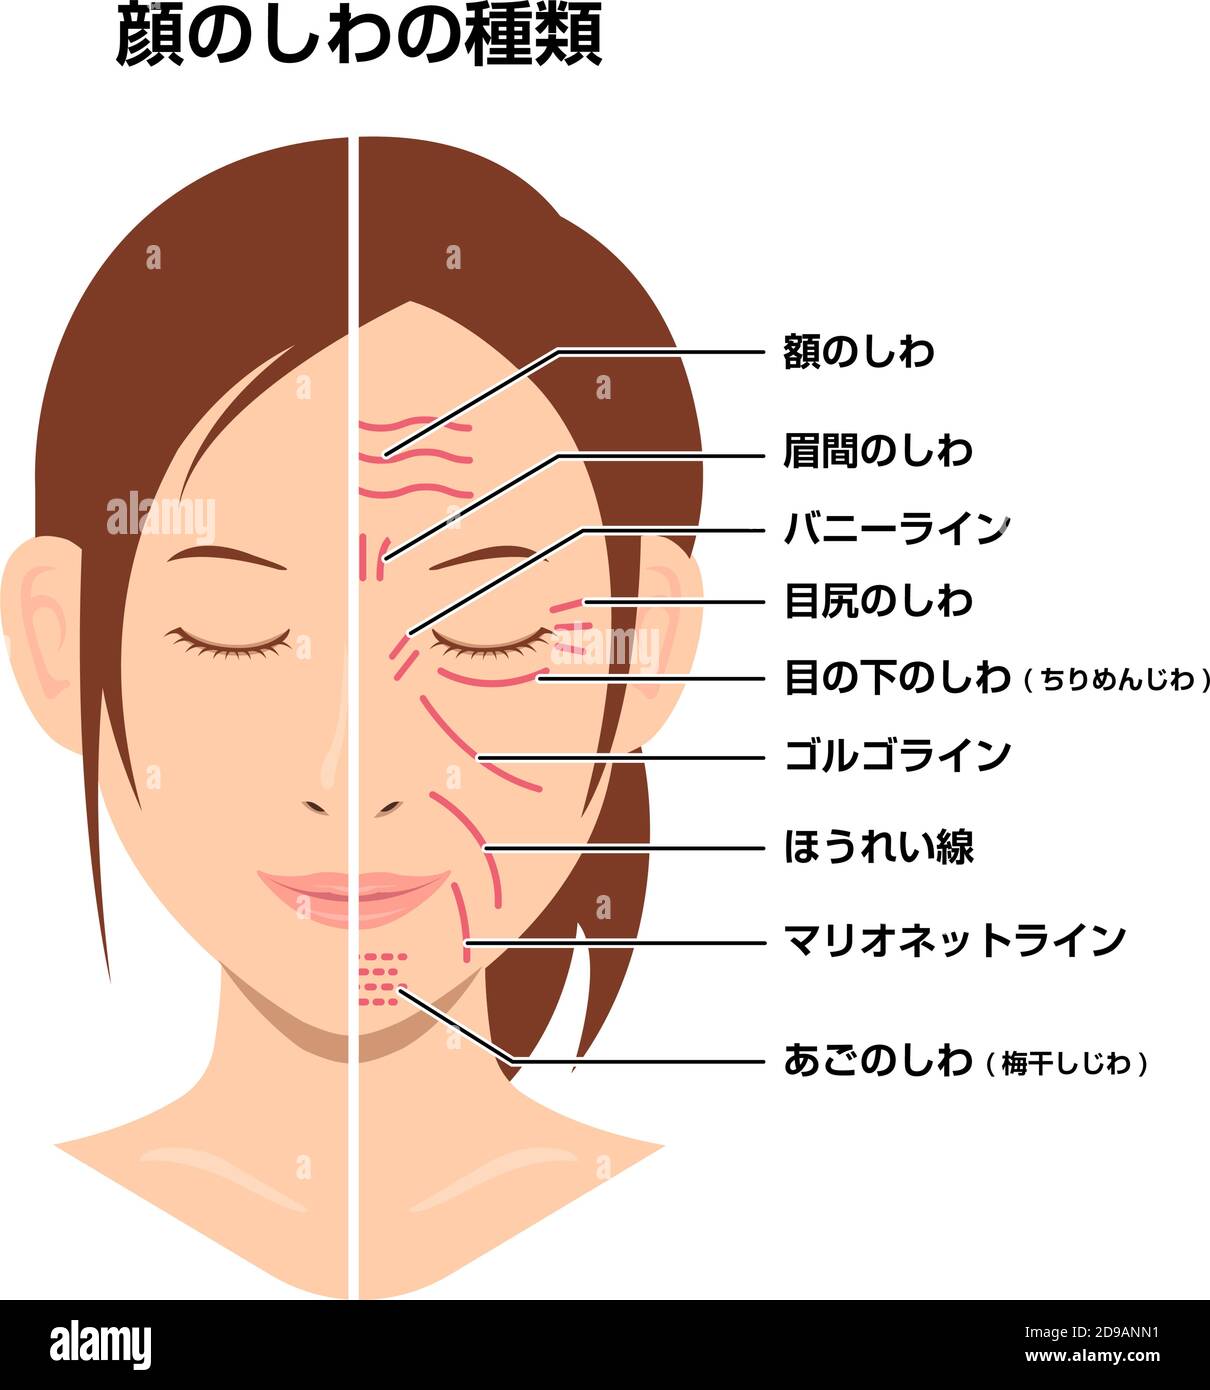 Wrinkles face and wrinkle-free face ( female face ) vector illustration / Japanese Stock Vector